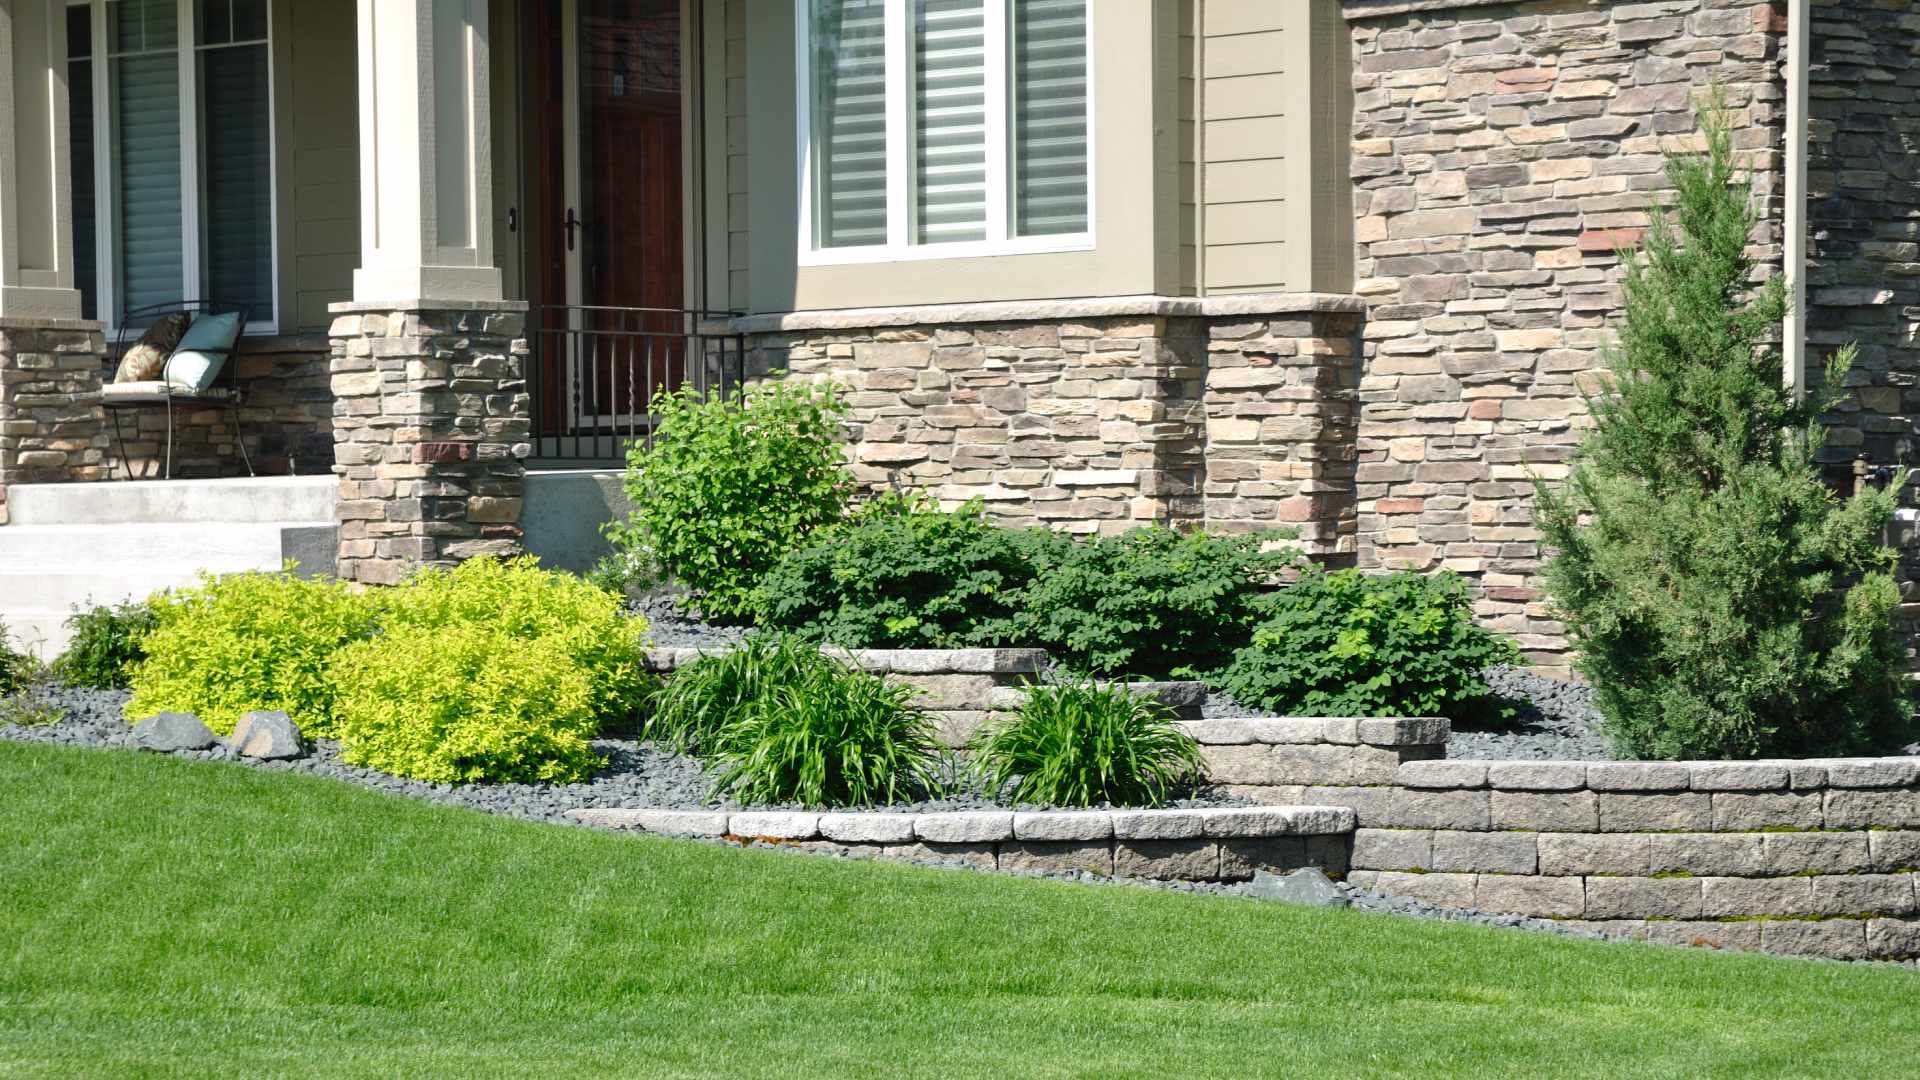 Blend Functionality & Style With a Retaining Wall for Your Sloped Yard